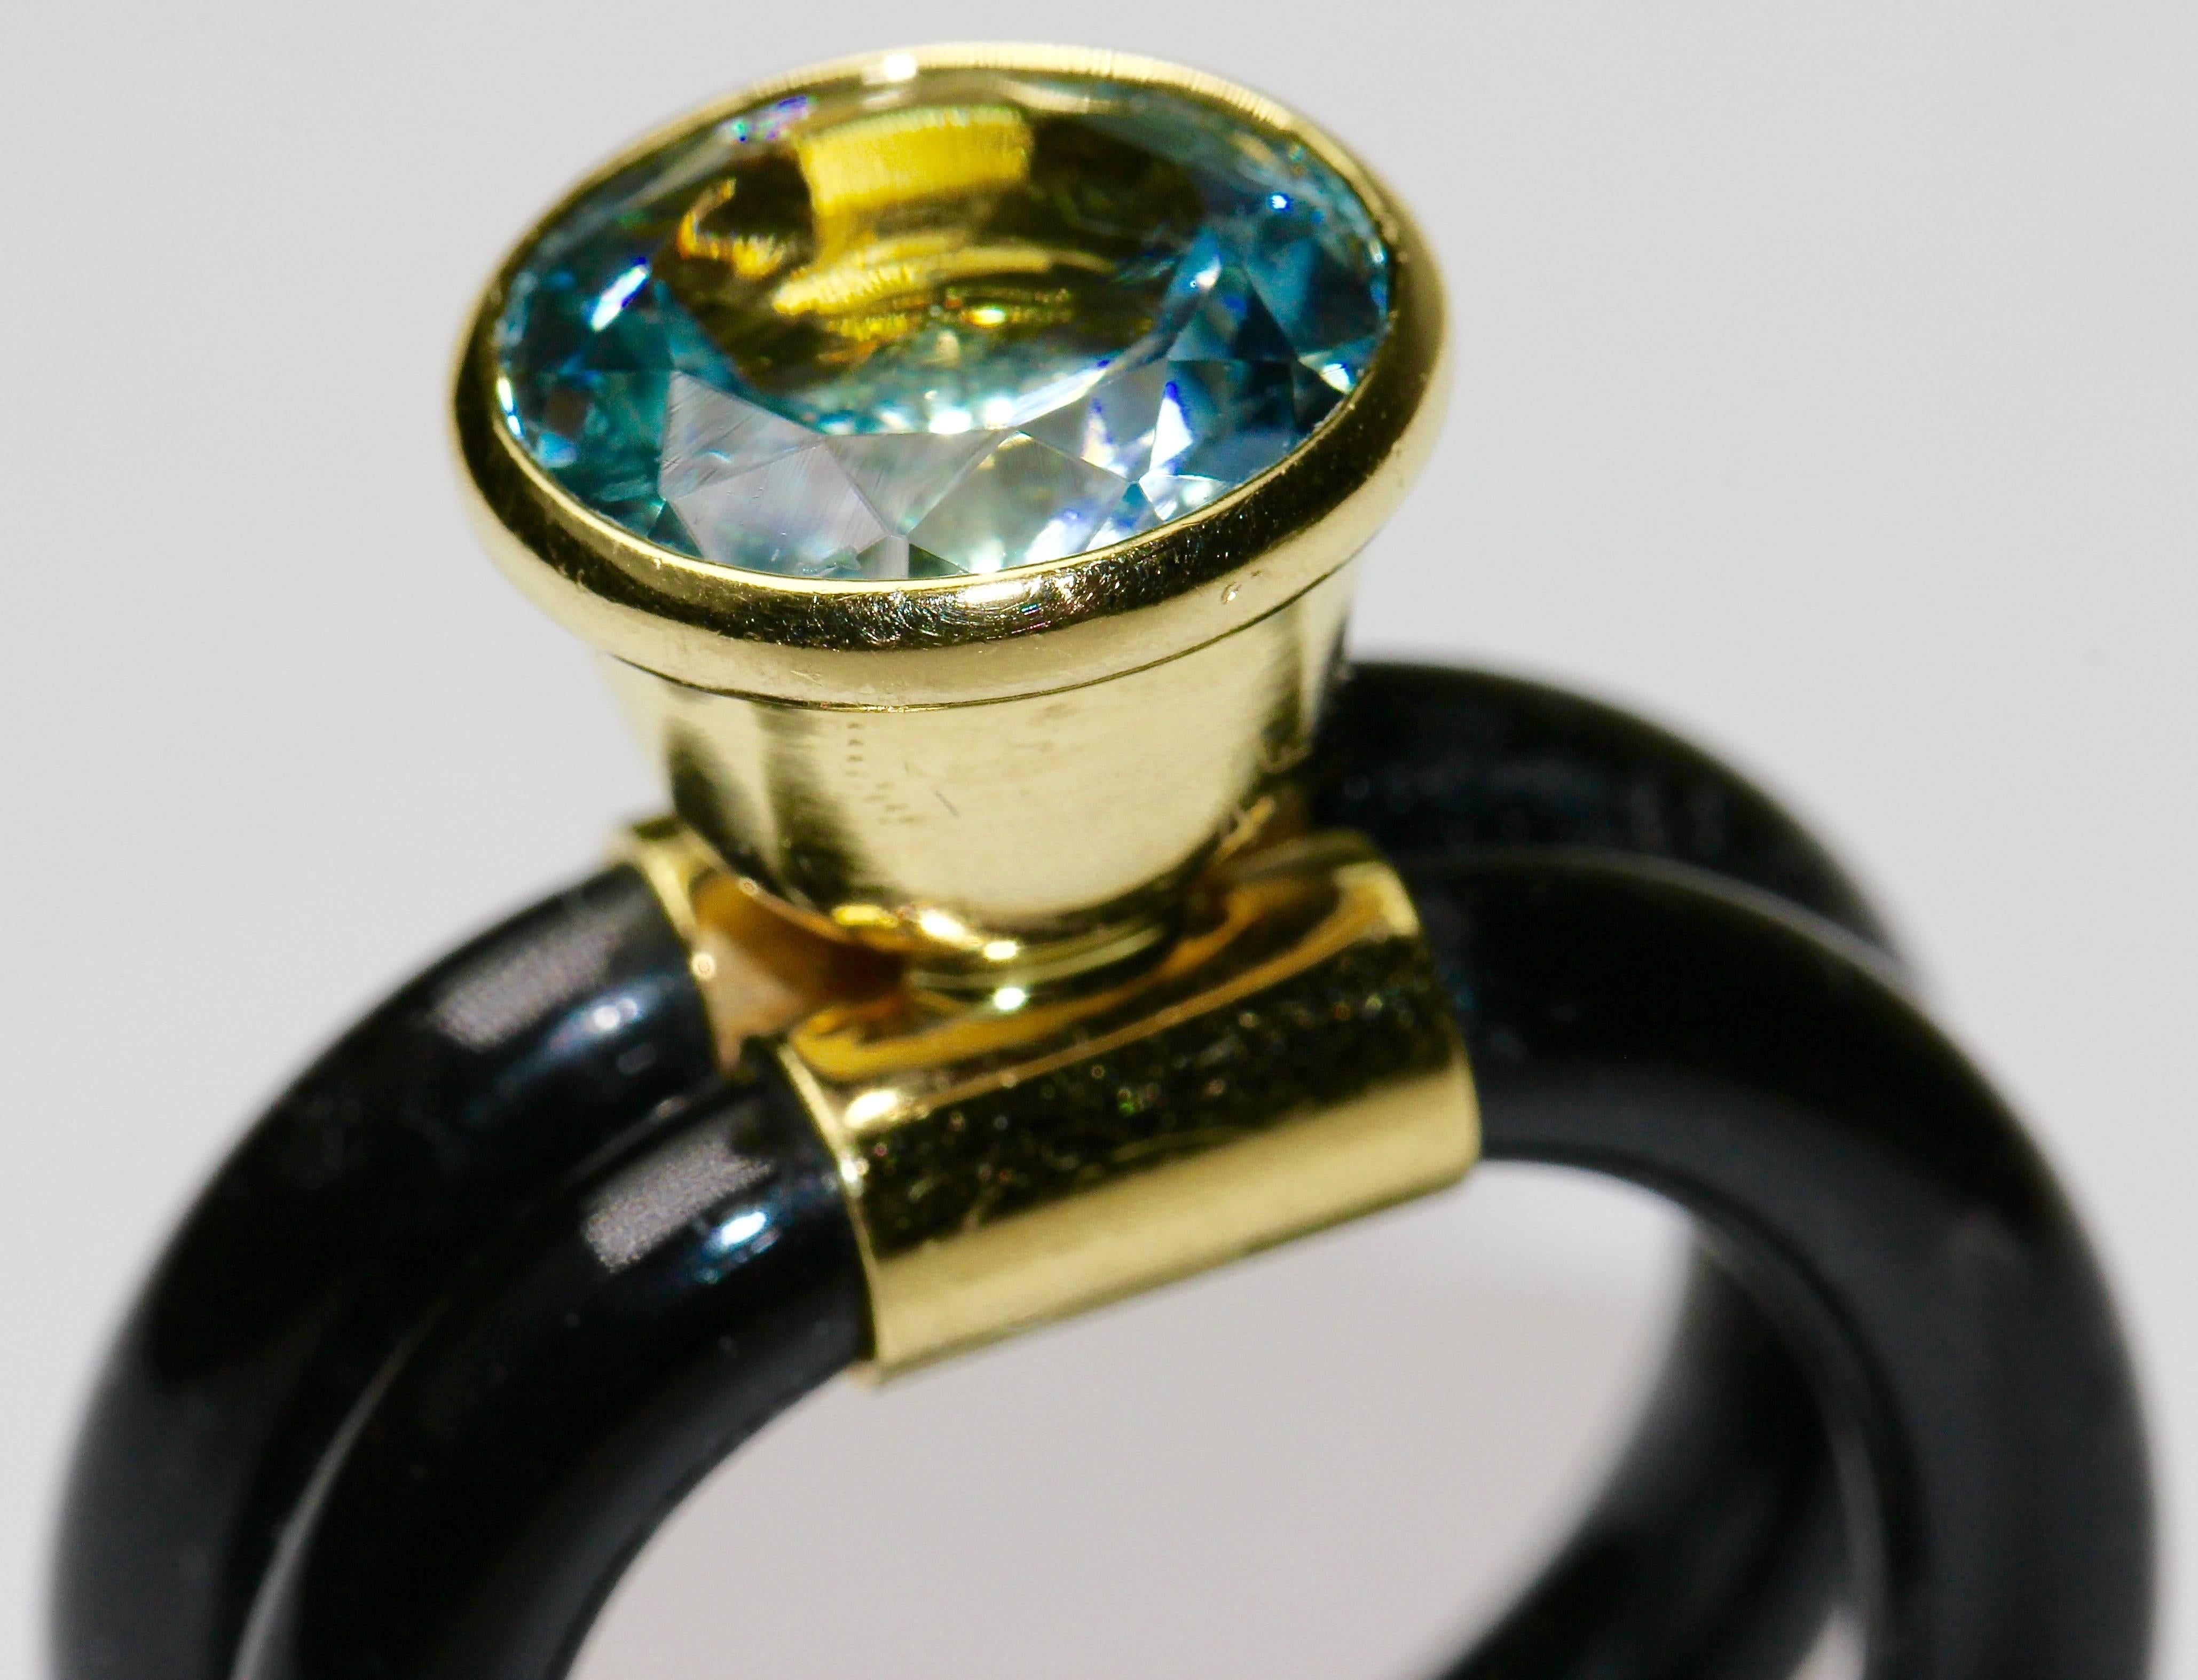 Fancy ladies ring with large and qualitative aquamarine solitaire with a diameter of about 12mm.
18k gold and double finger grip made of rubber or latex.
Hallmarked.
Inner diameter (ring size): 18-19mm

This piece of jewelry can be worn with any